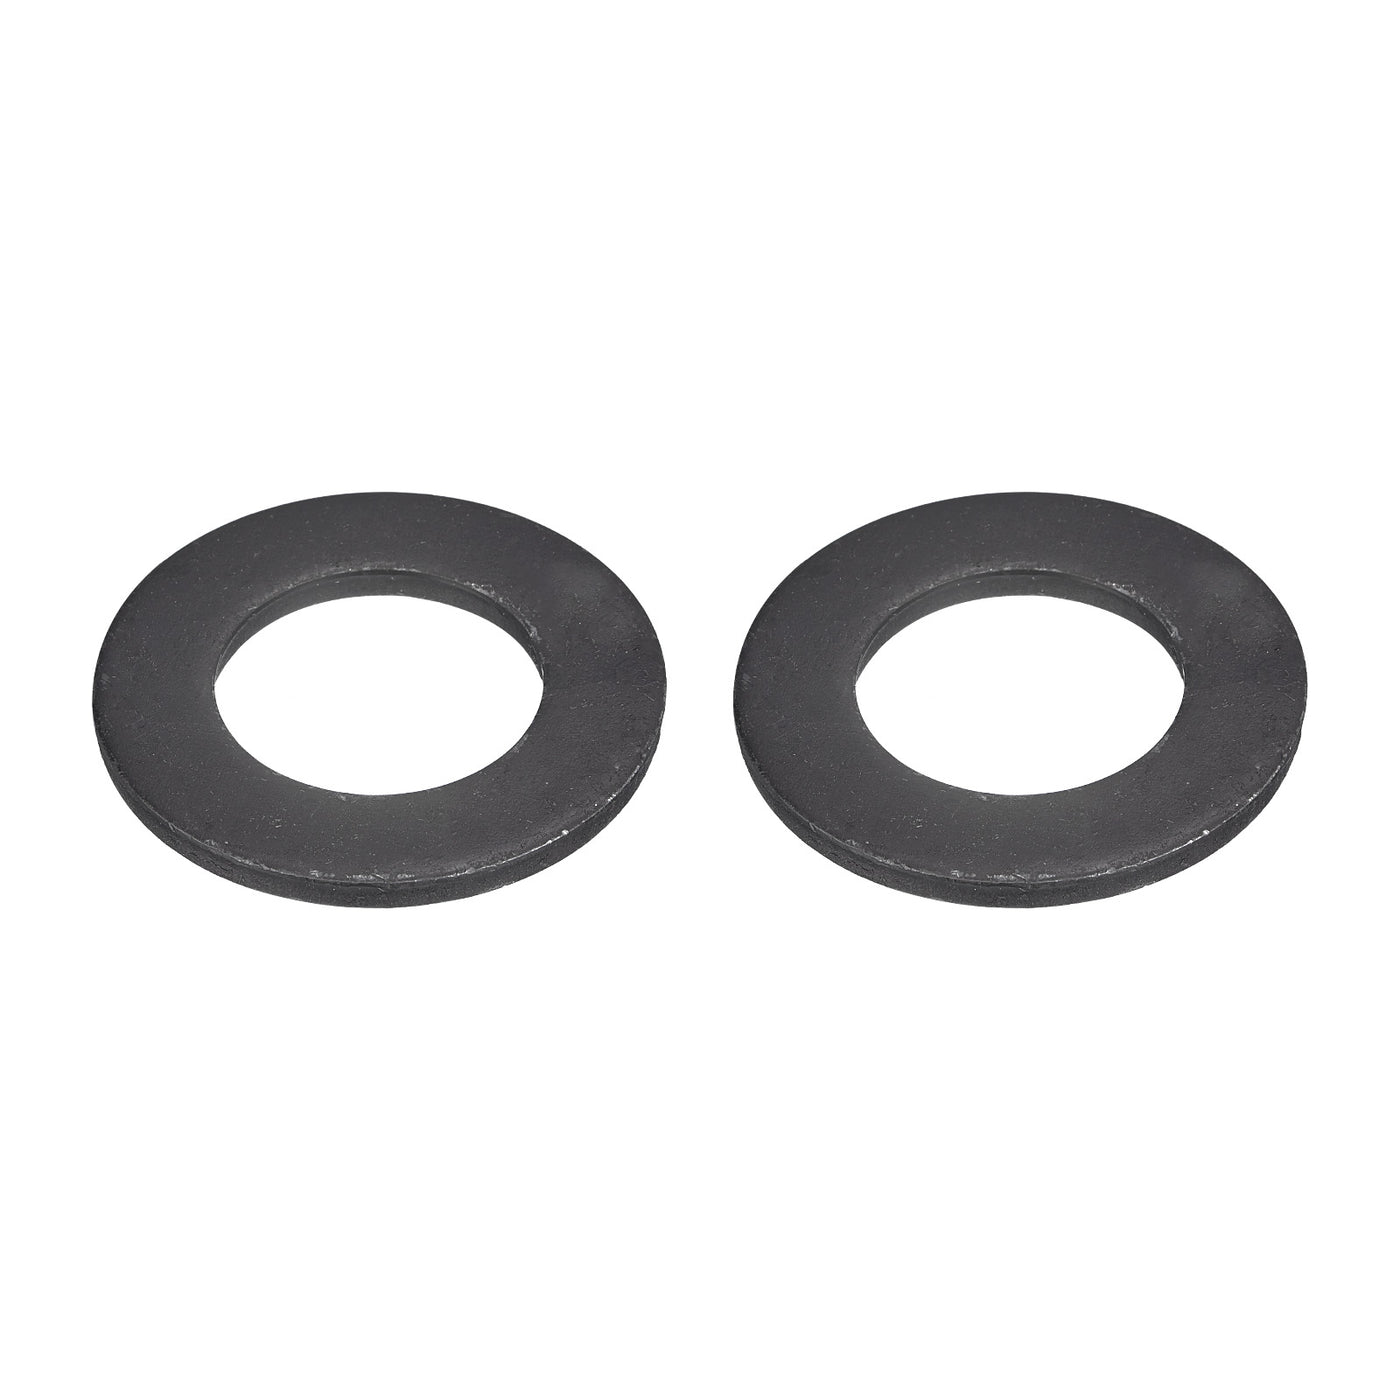 uxcell Uxcell M27 Carbon Steel Flat Washer 2pcs 28x50x3.7mm Grade 8.8 Alloy Steel Fasteners